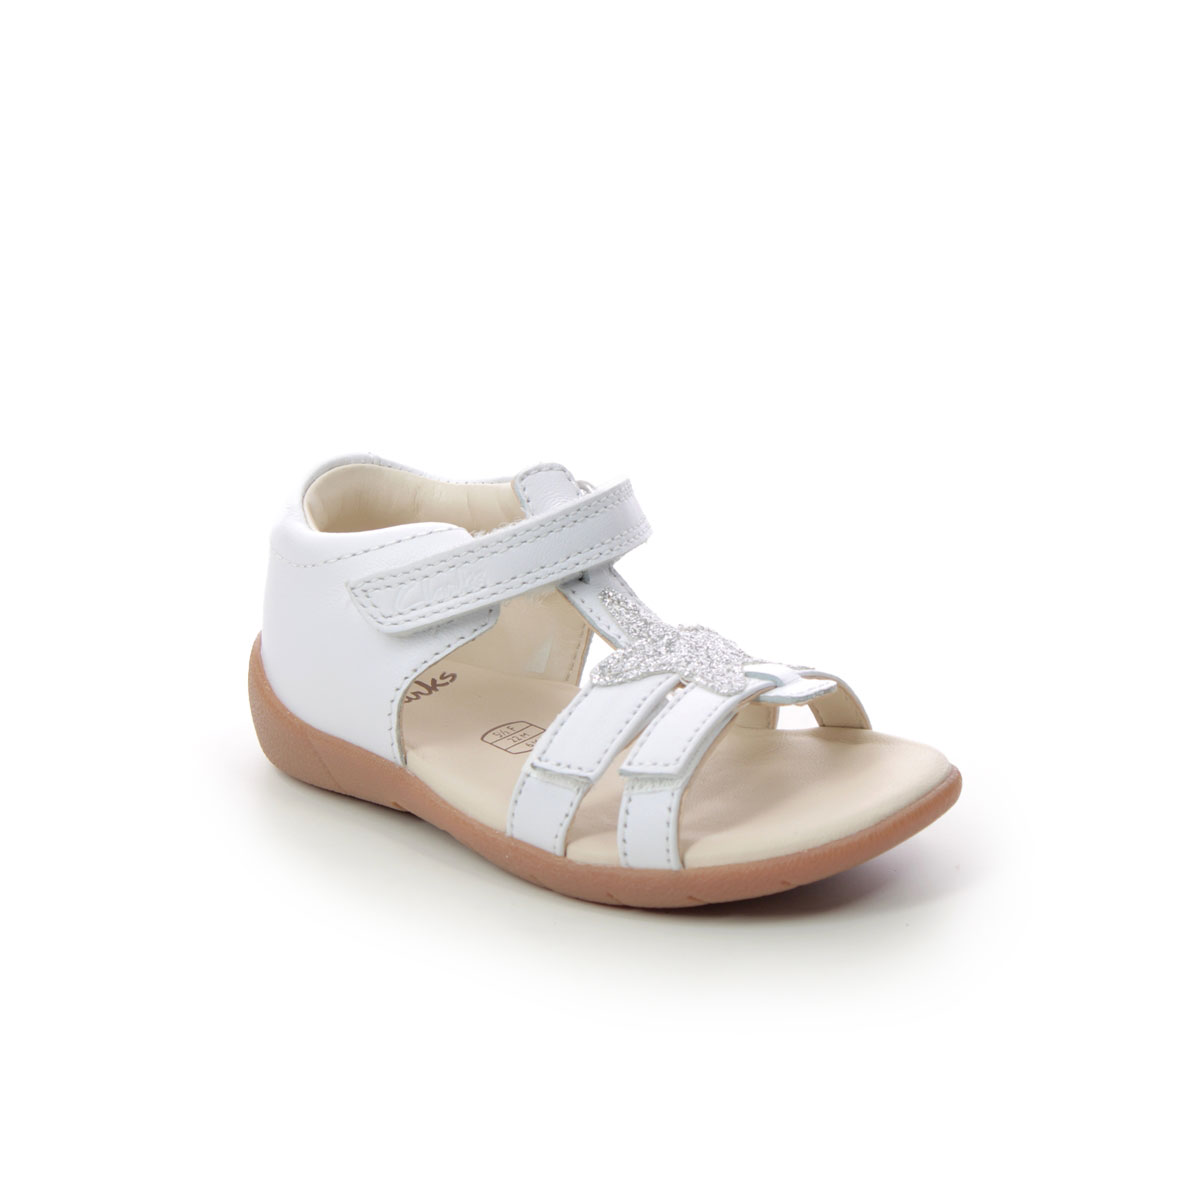 Clarks Zora Summer T White Leather Kids Sandals 566436F In Size 5.5 In Plain White Leather F Width Fitting Regular Fit For kids